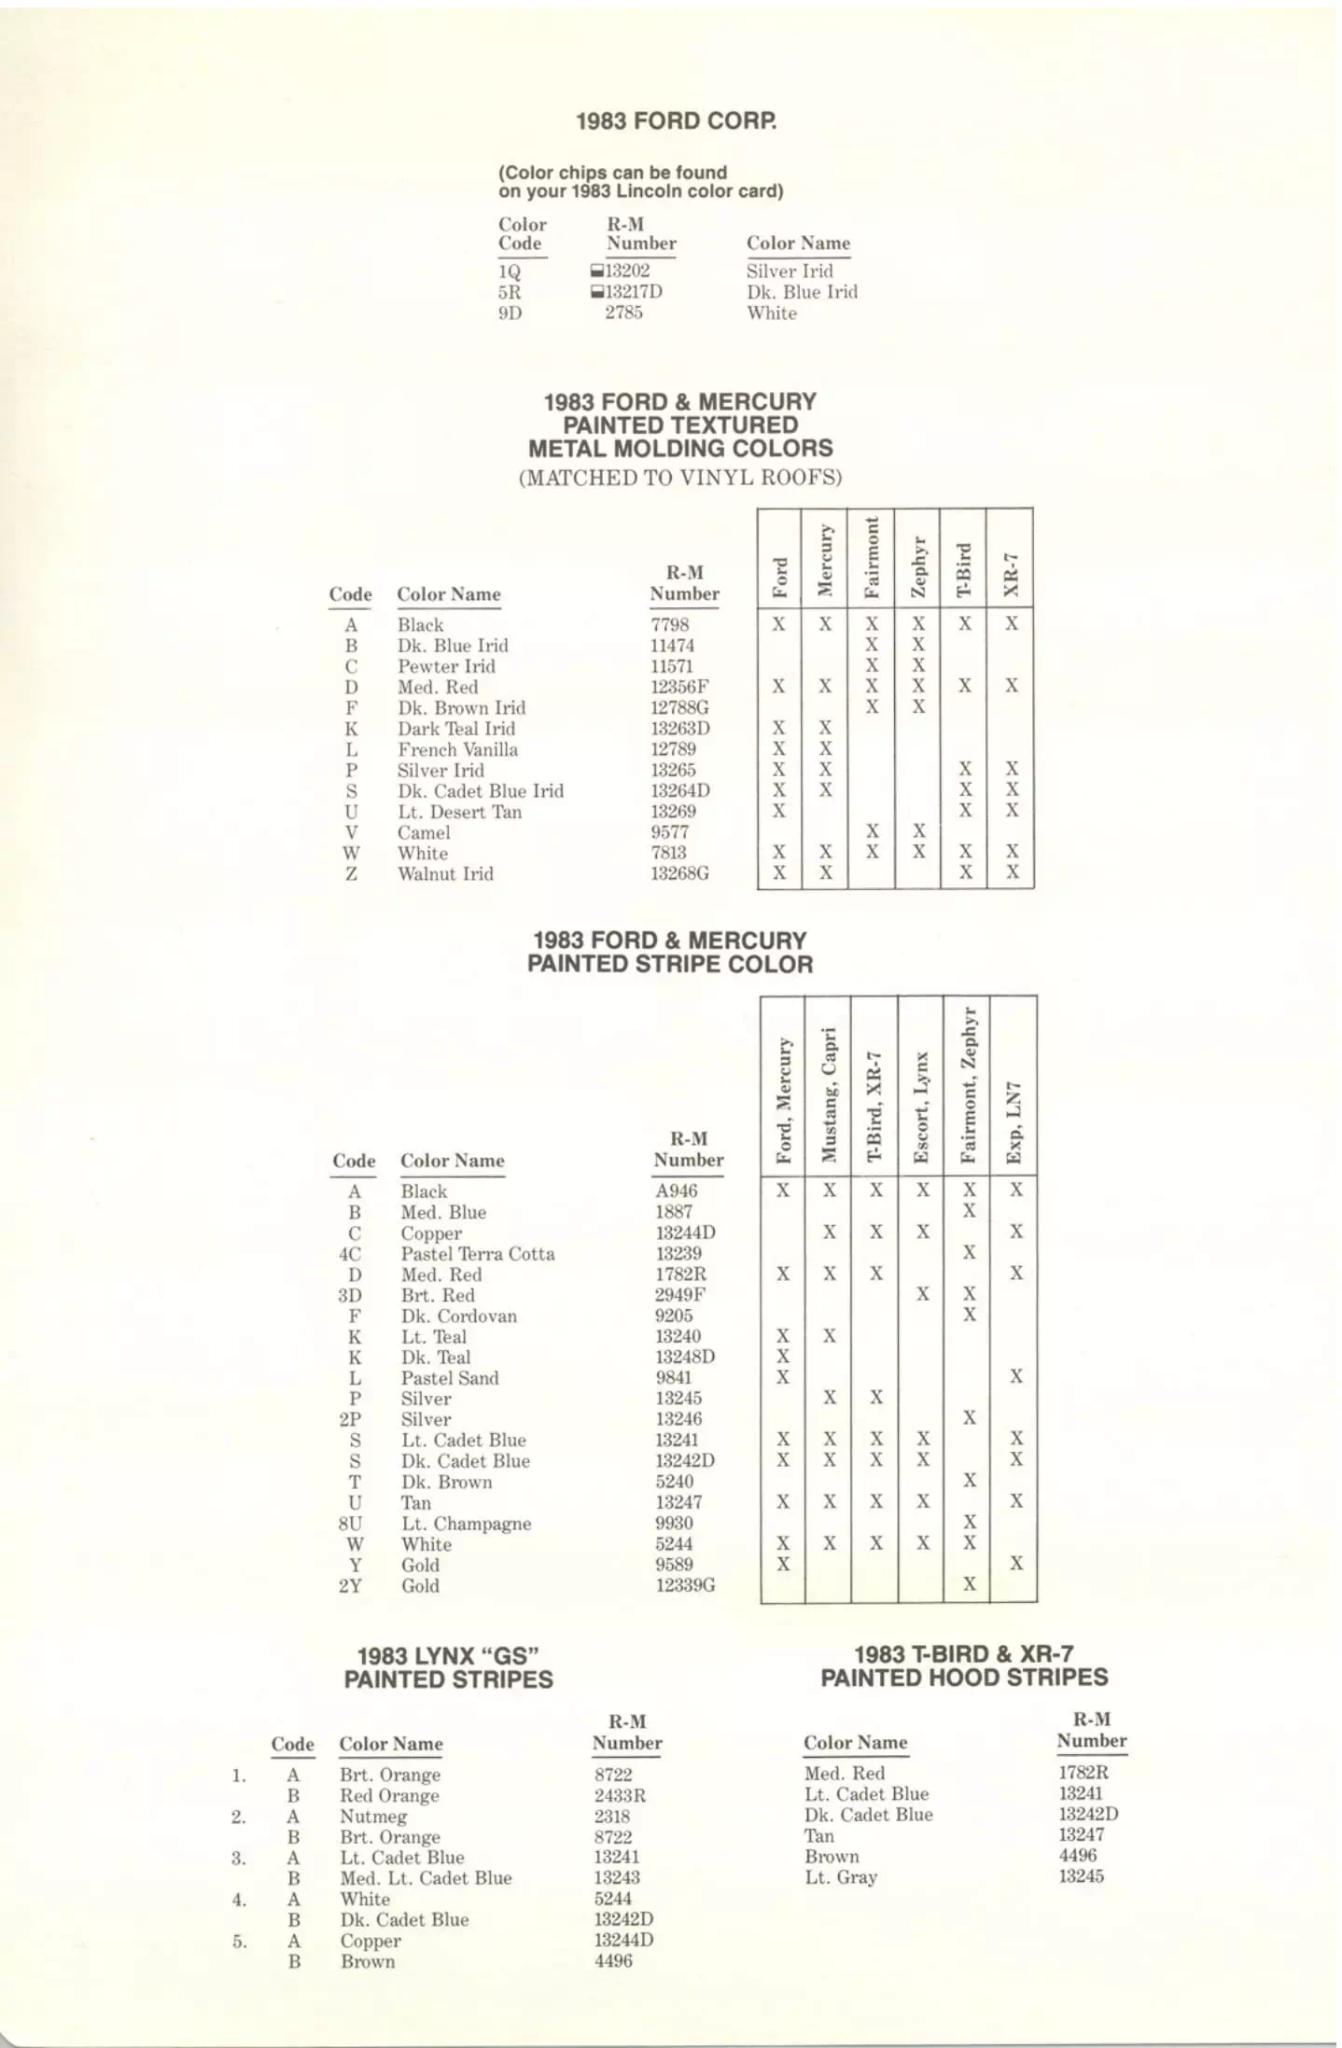 Colors, Codes and Examples used in 1983 on Ford Vehicles